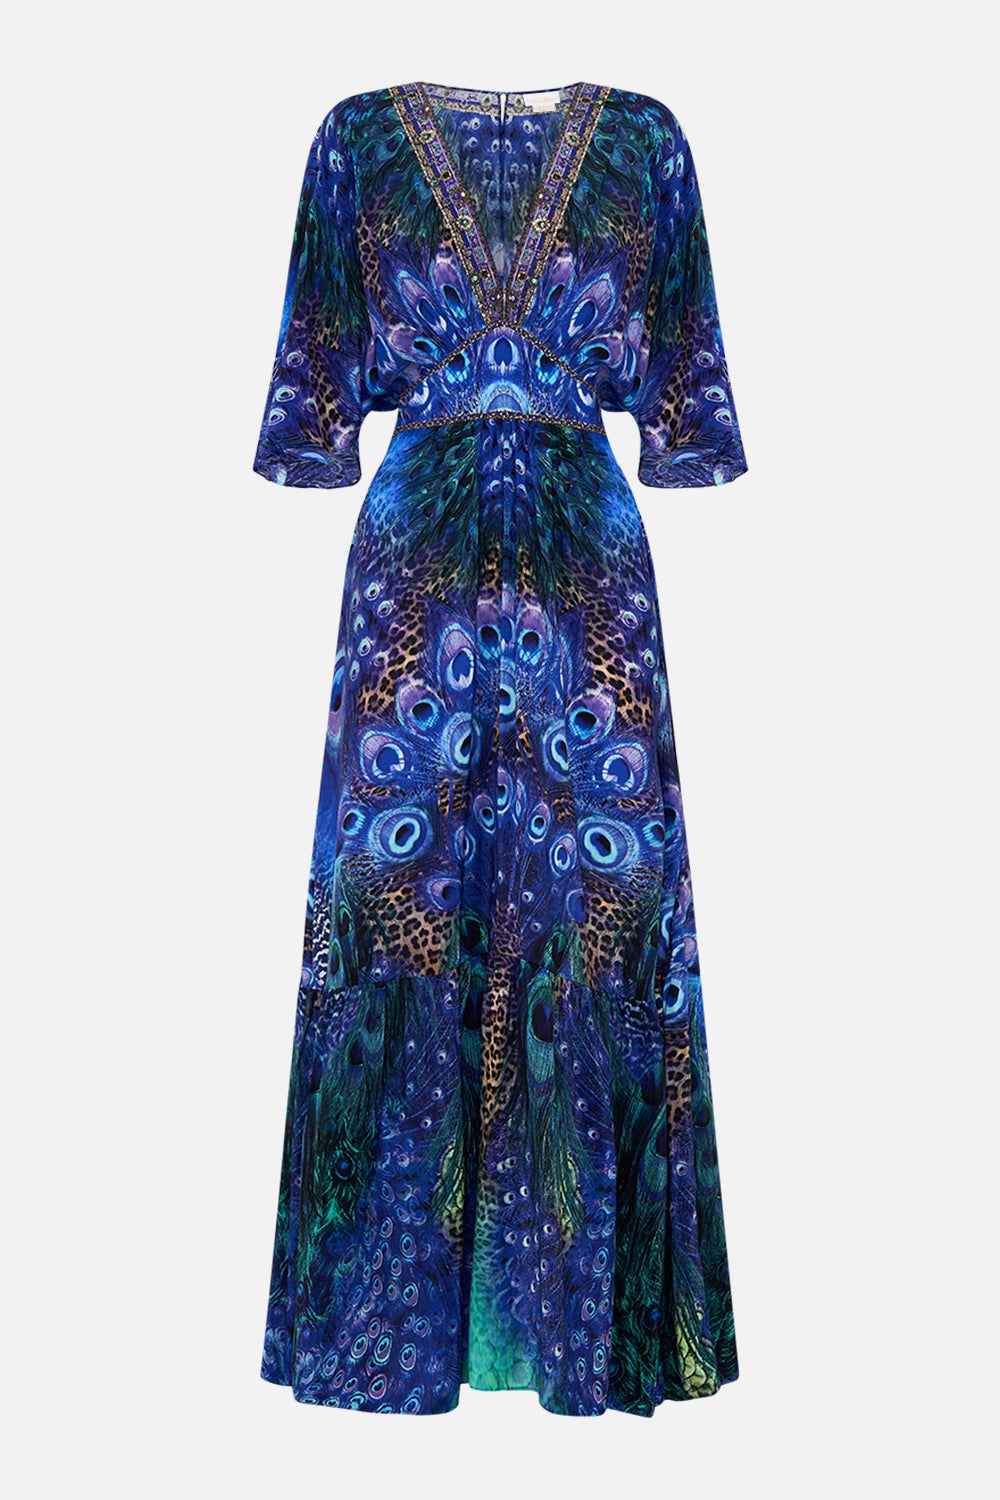 Product view of CAMILLA silk ruffle dress in Peacock Rock print